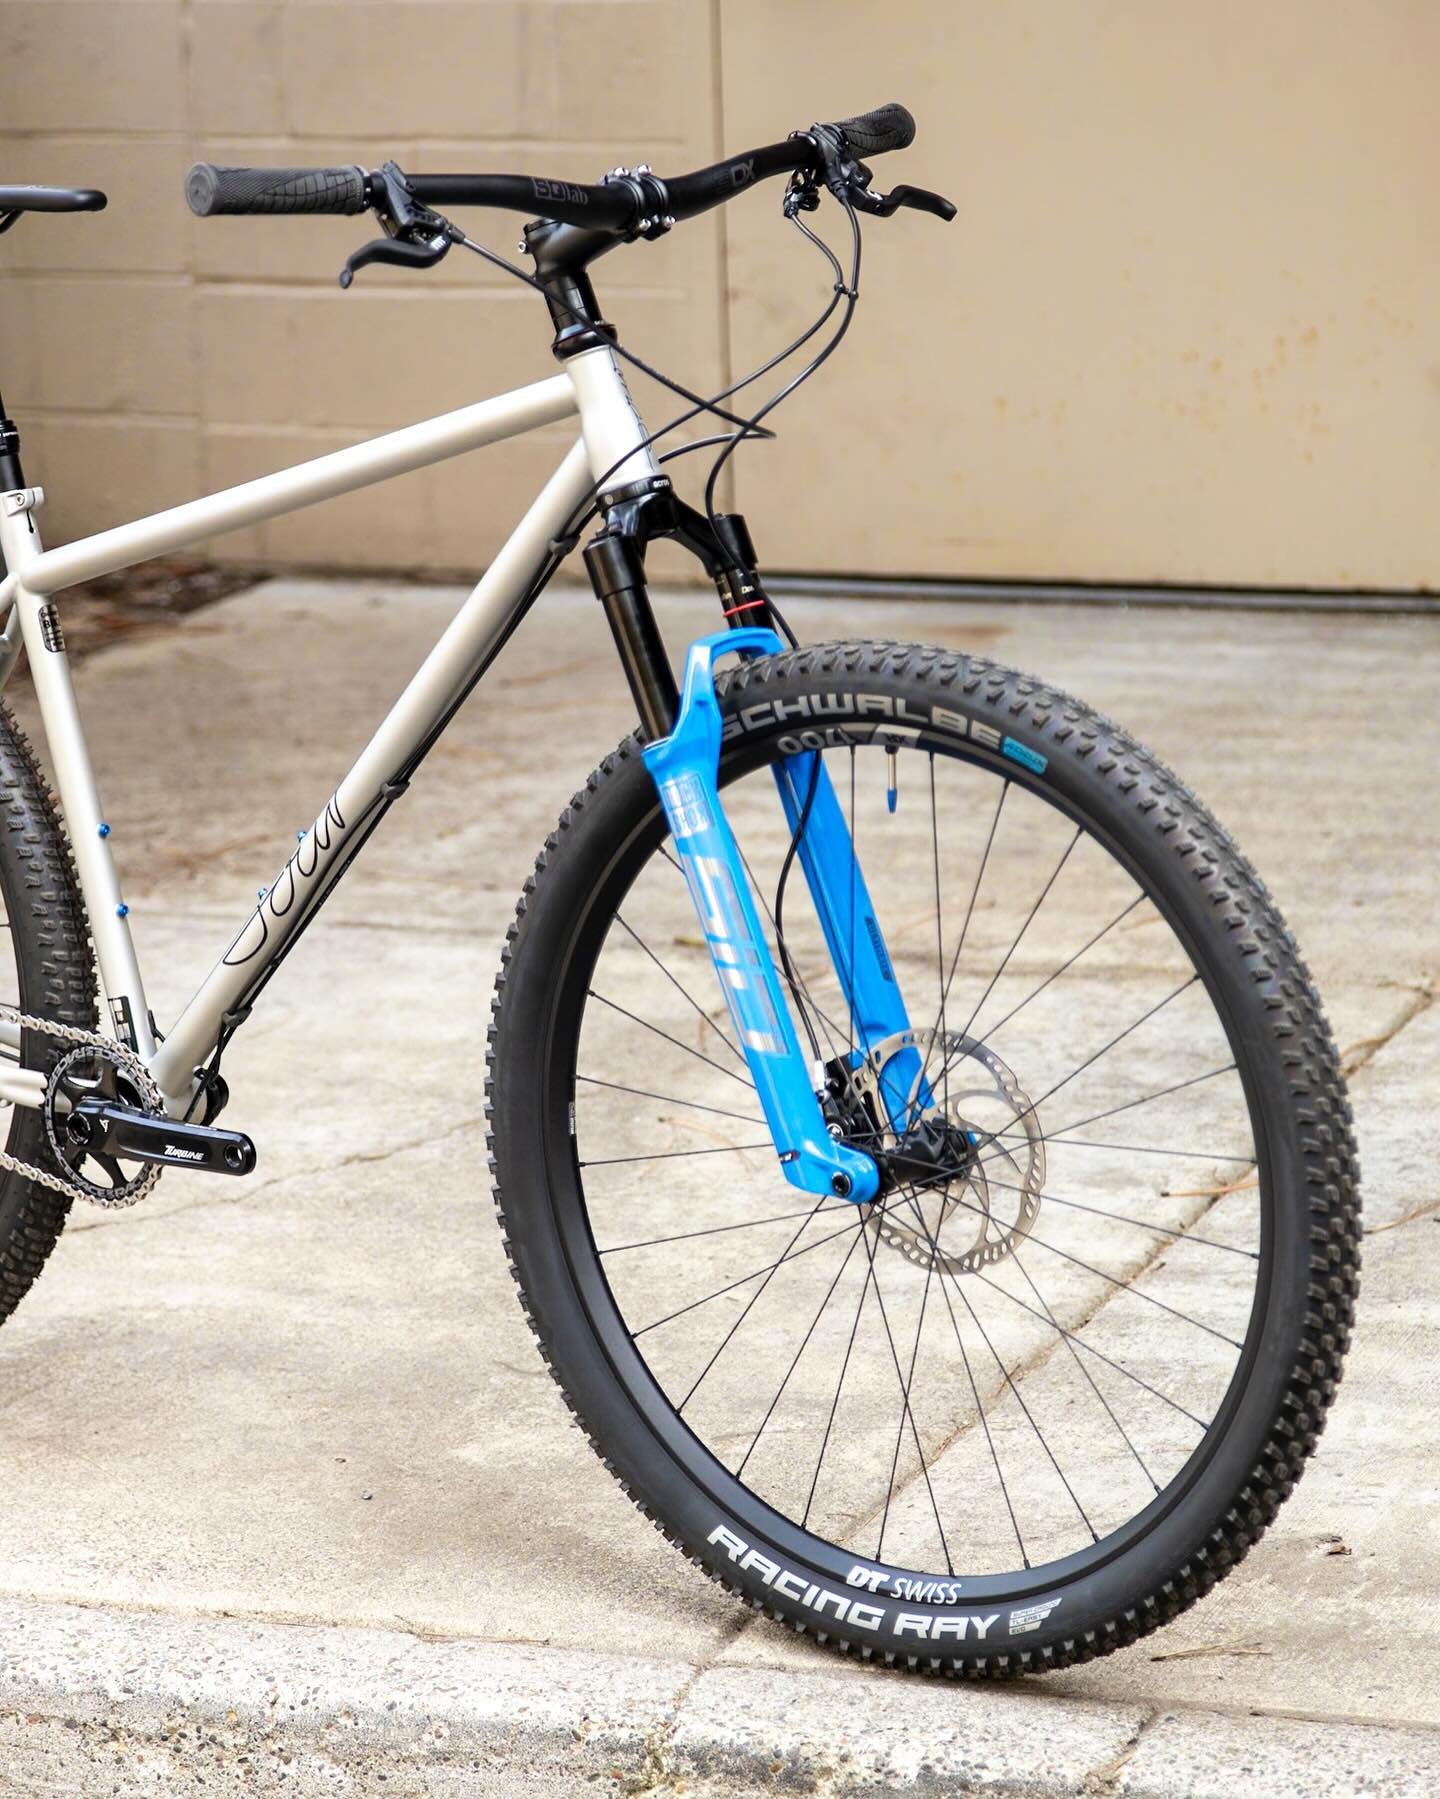 Slam dunk on this single speed build!

@sour.bicycles Pasta Party is super versatile. 

Set it up as a single speed, or with gears. Run a rigid fork, or a squishy fork for more poppin around trails. Use it as an epic bike packing rig, or commute arou